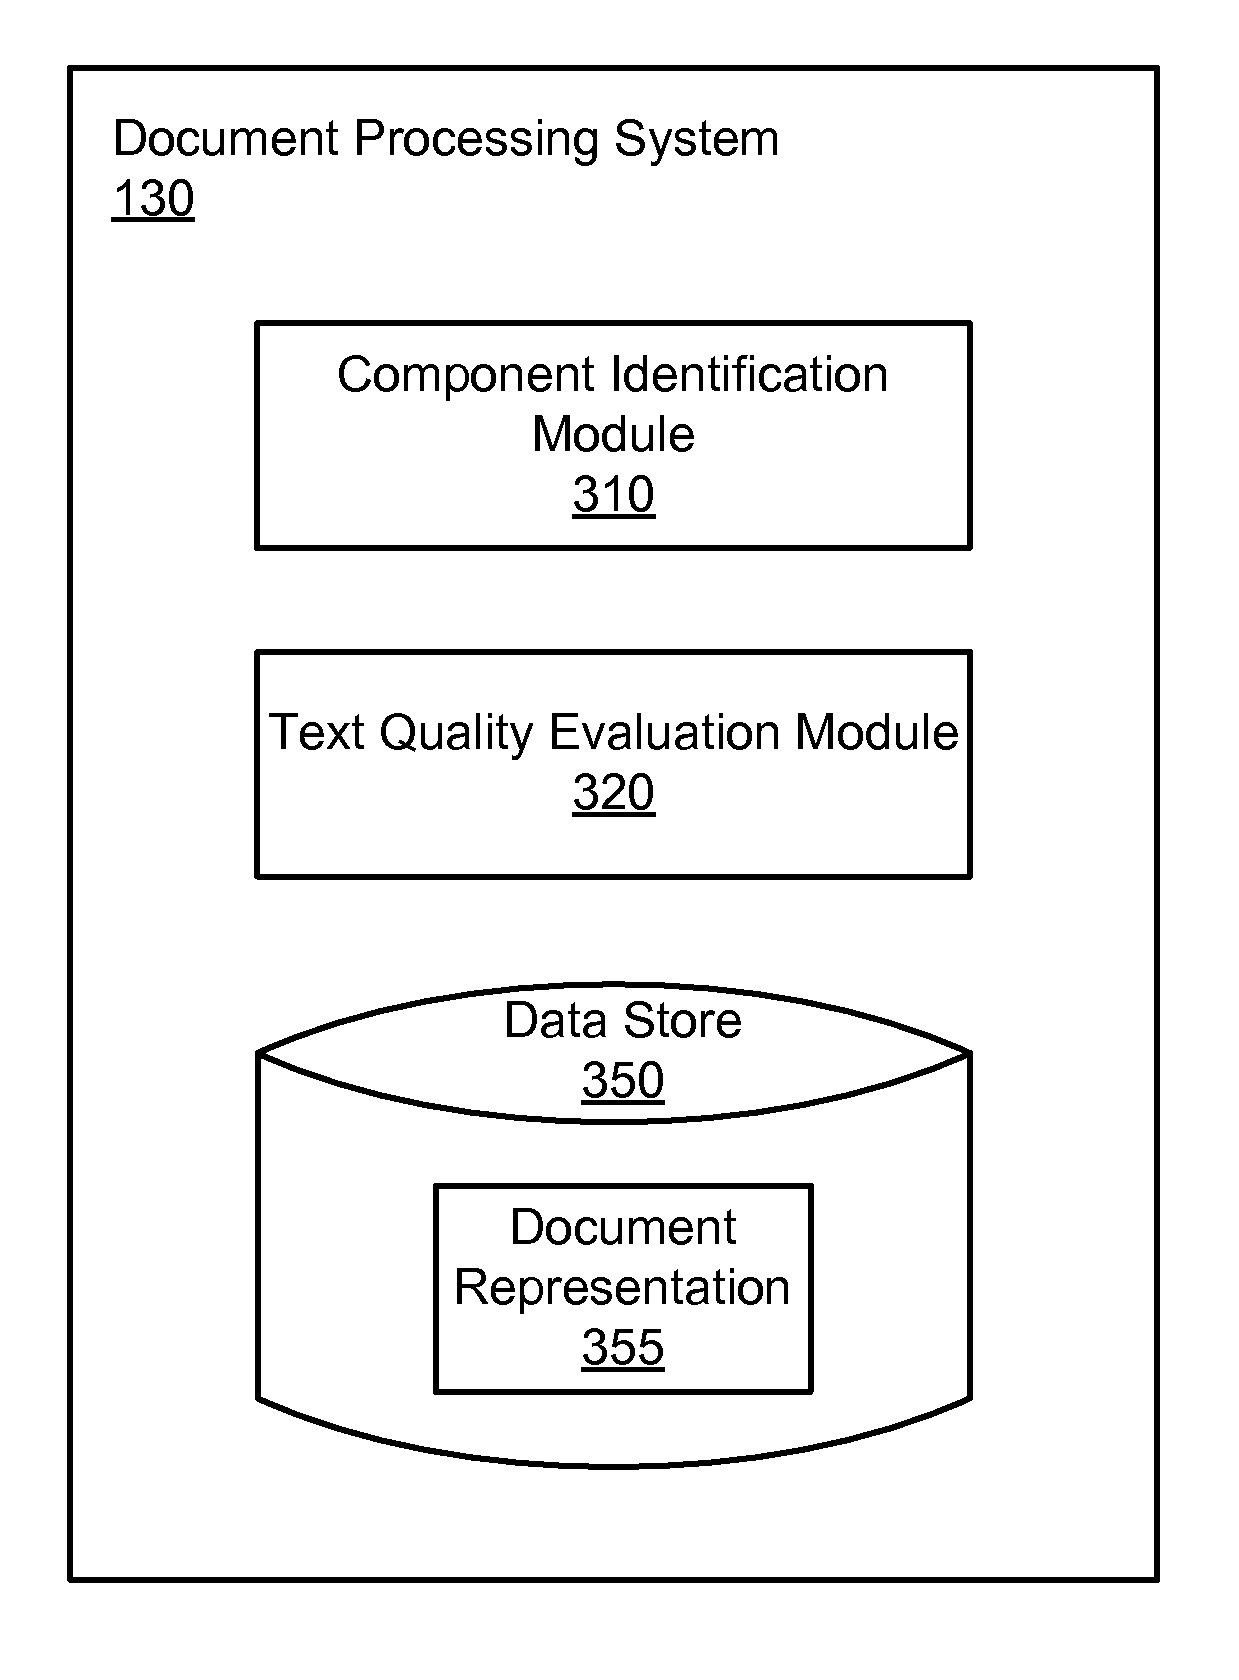 Display of document image optimized for reading